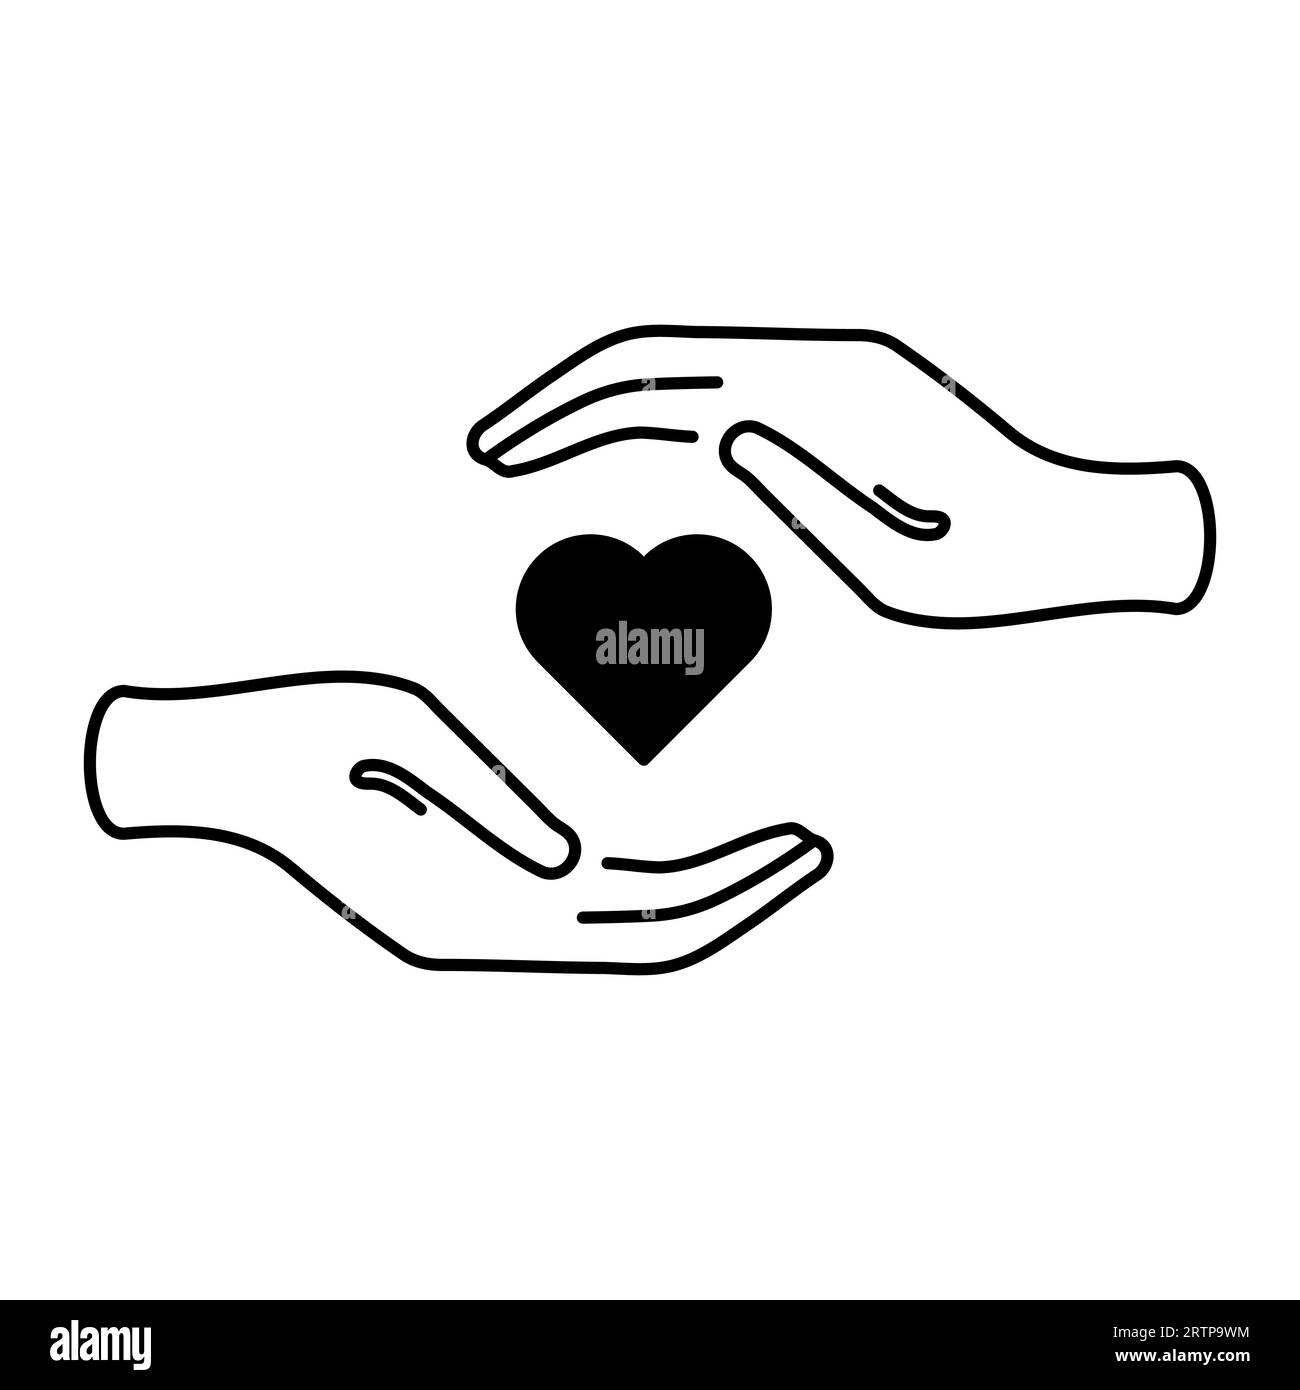 Heart between hands icons. Symbol of care, love, charity. Vector illustration isolated on white background Stock Vector